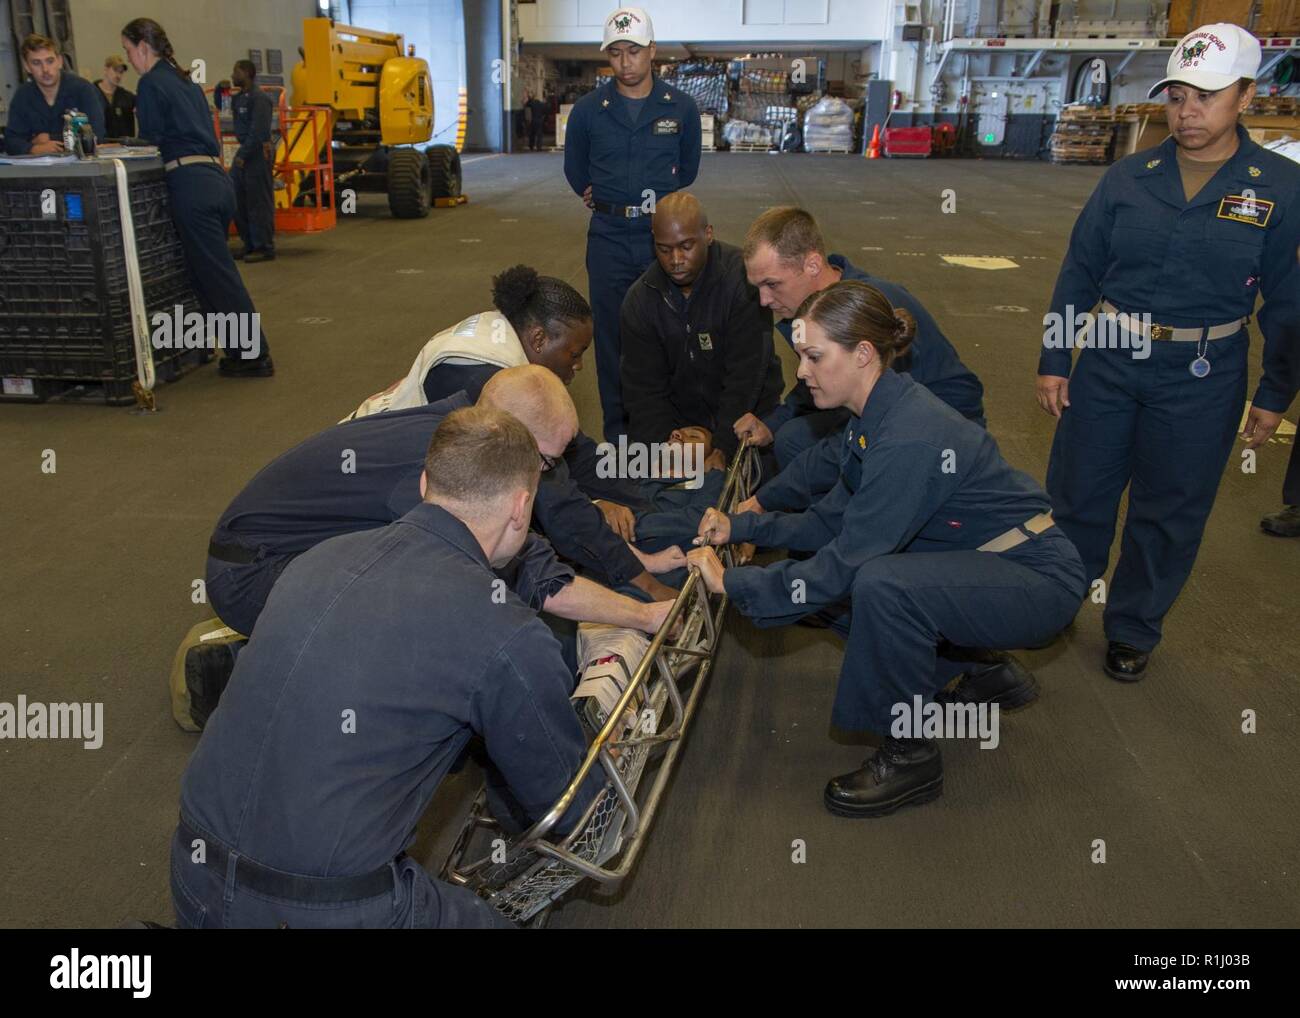 PACIFIC OCEAN (Sept. 21, 2018) Sailors, assigned to the amphibious assault ship USS Bonhomme Richard (LHD 6), place a simulated casualty onto a stretcher during a mass casualty drill in the ship’s hangar bay. Bonhomme Richard is currently underway in the U.S. 3rd Fleet area of operations. Stock Photo